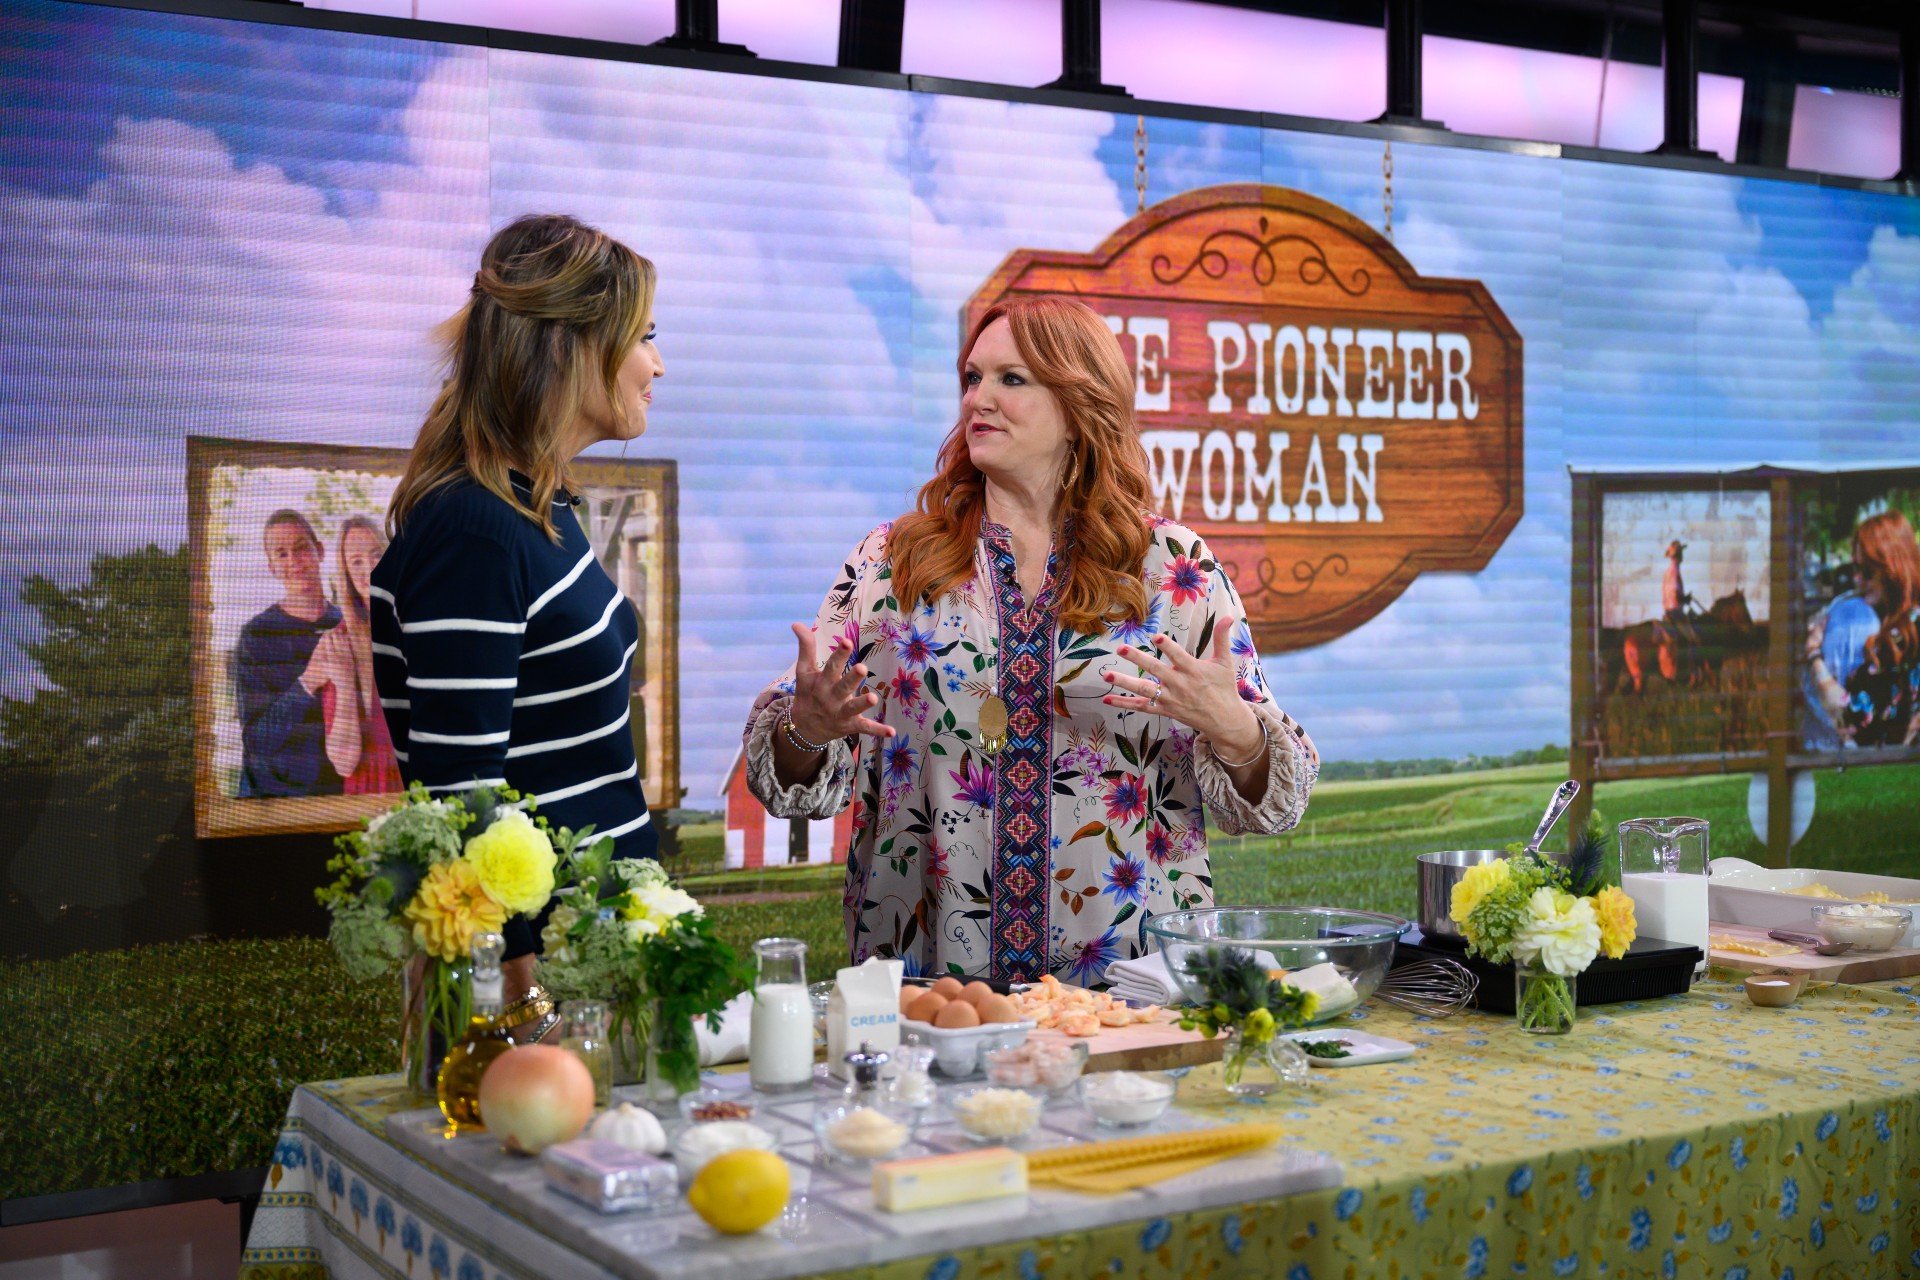 Ree Drummond wears a floral shirt and gives a cooking demonstration on the Today Show with Savannah Guthrie.